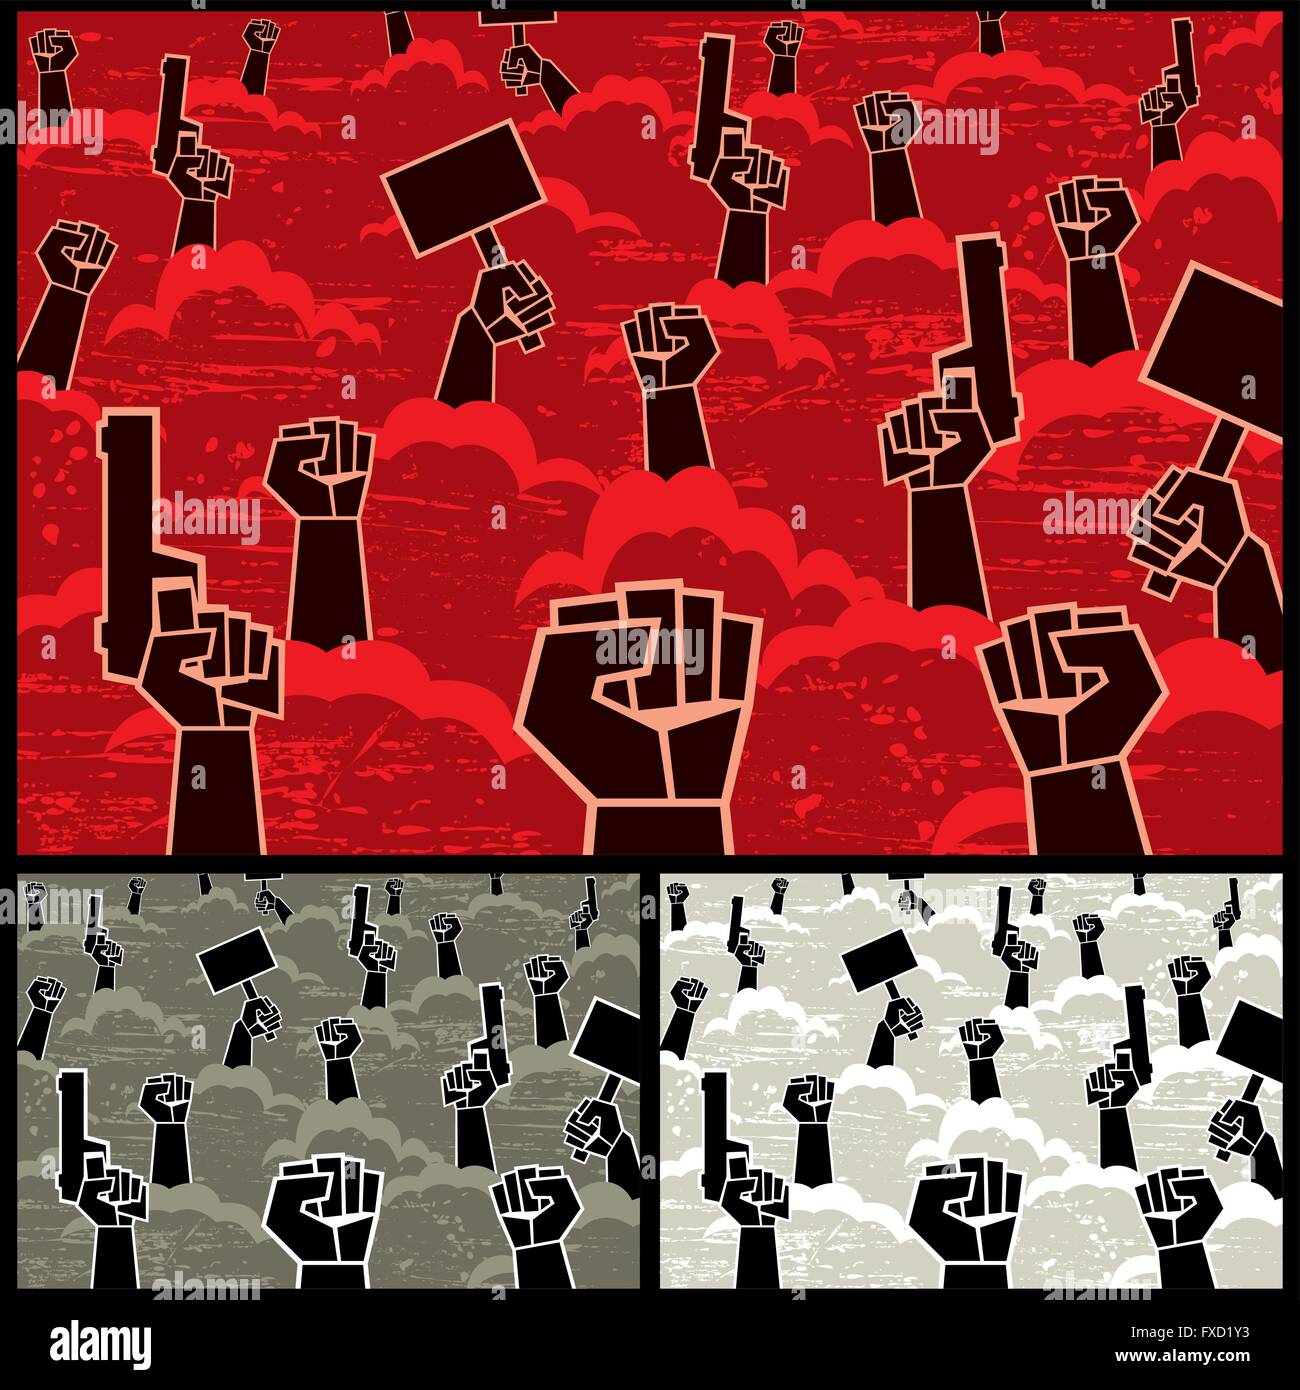 Abstract picture of rebellion. Below is the same picture in 2 different color versions. Stock Vector